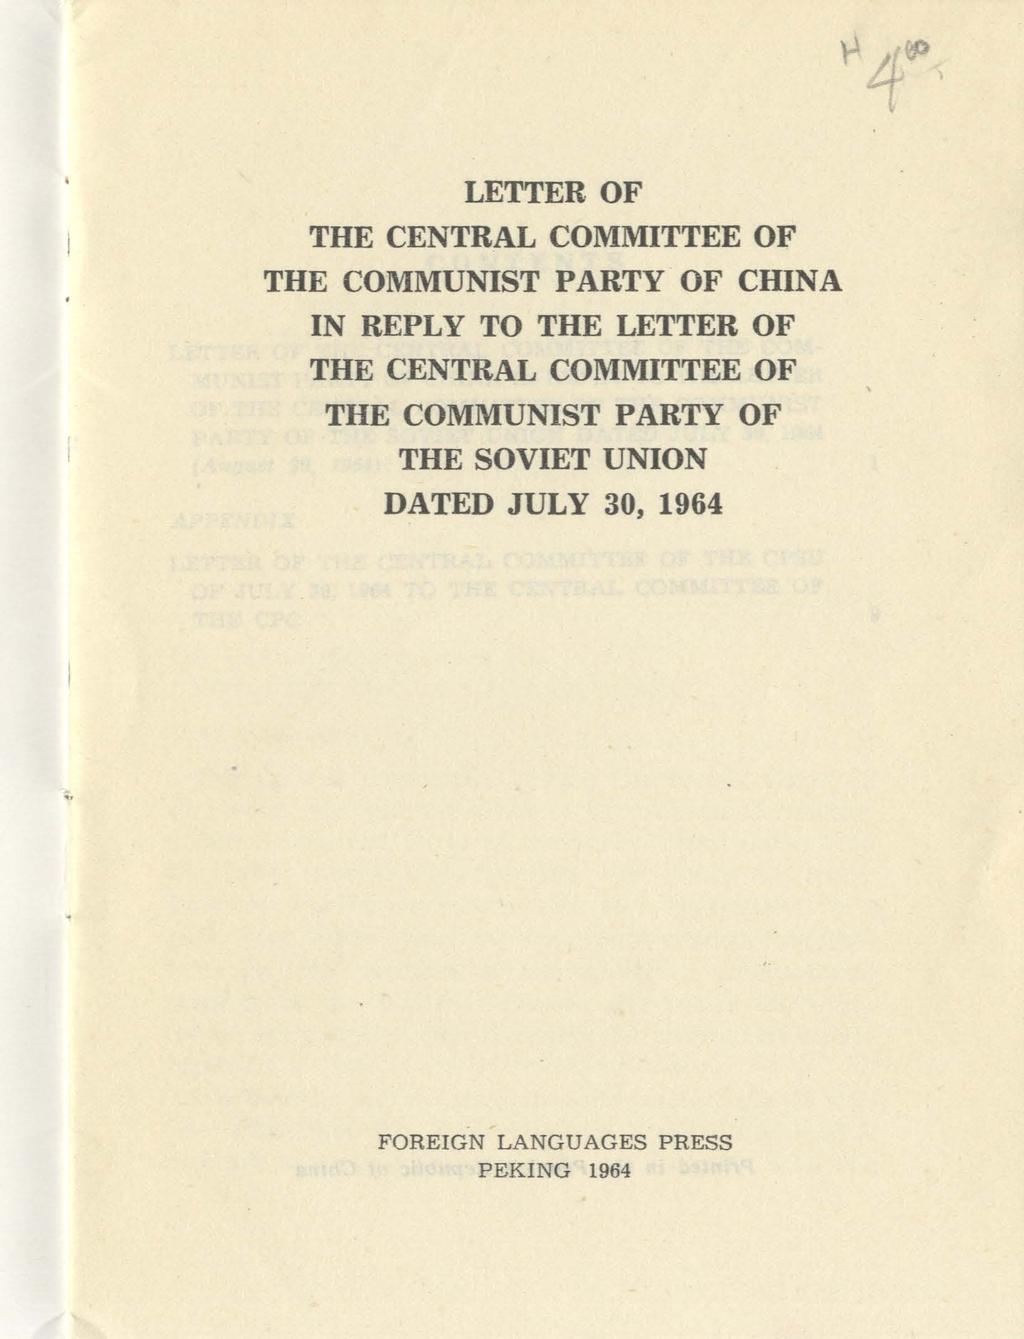 ~ 4 1 LETTER OF THE CENTRAL COMMITTEE OF THE COMMUNIST PARTY OF CHINA IN REPLY TO THE LETTER OF THE CENTRAL